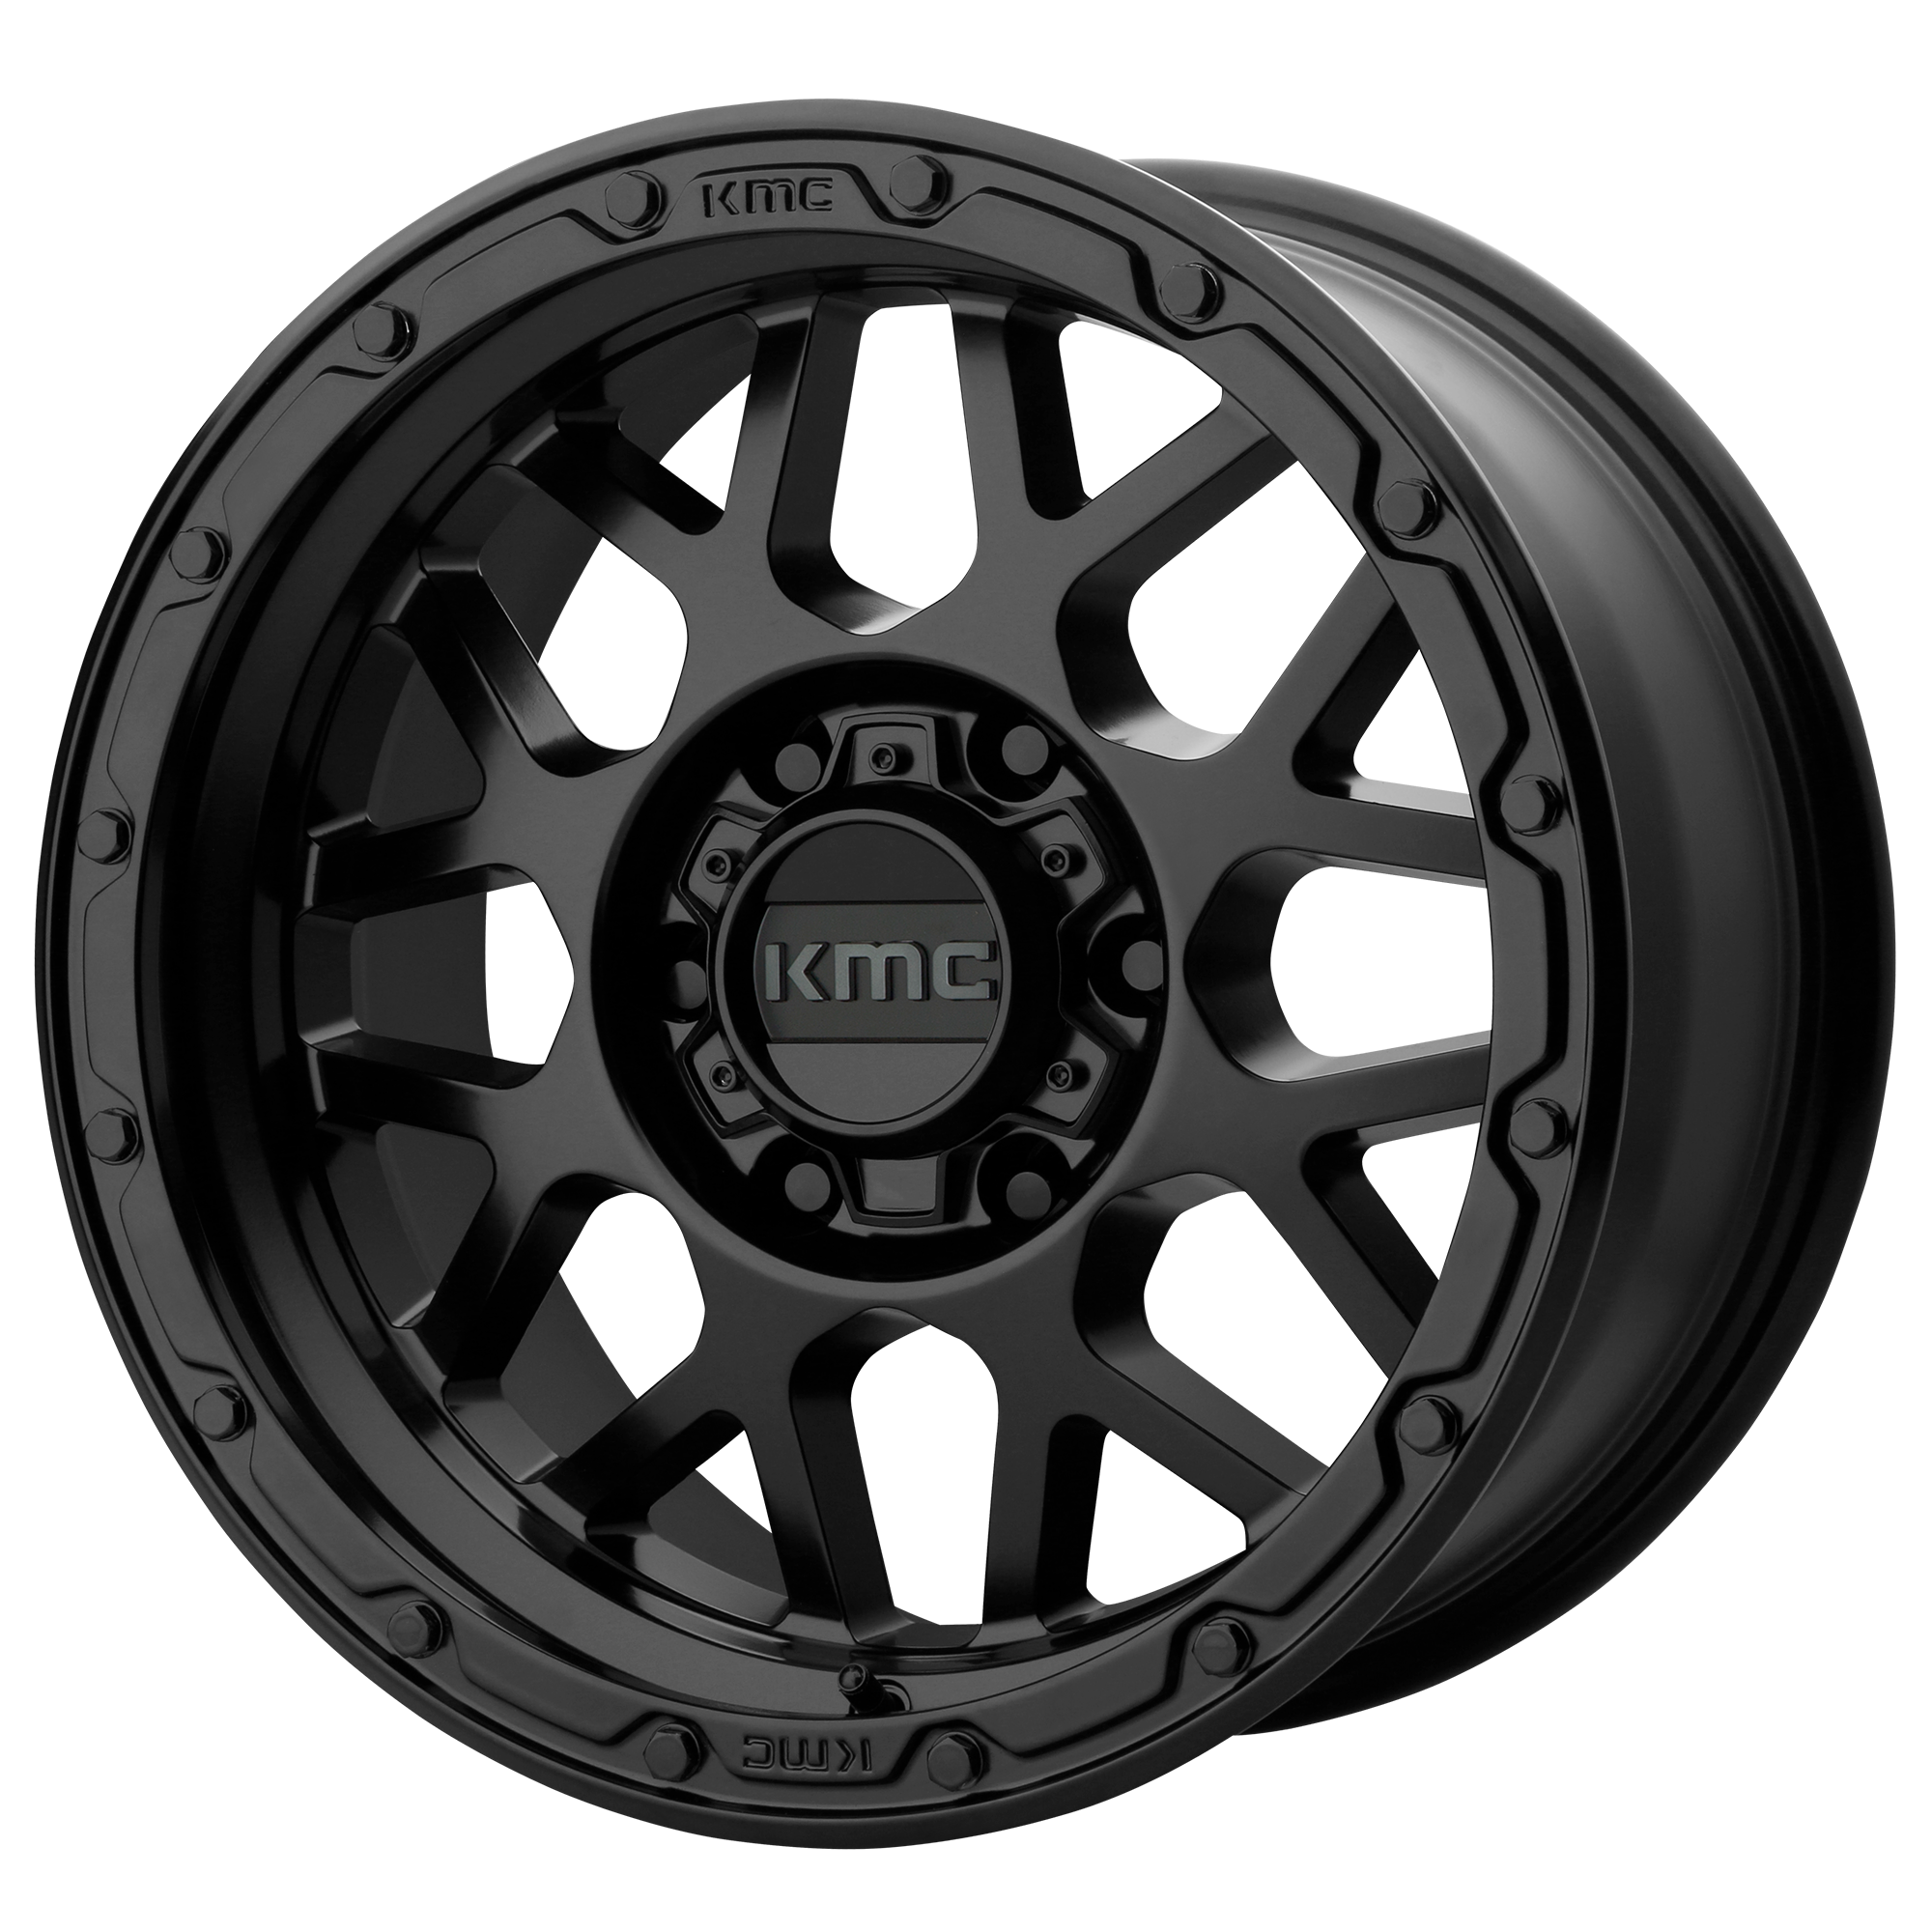 GRENADE OFF-ROAD 20x9 6x139.70 MATTE BLACK (18 mm) - Tires and Engine Performance